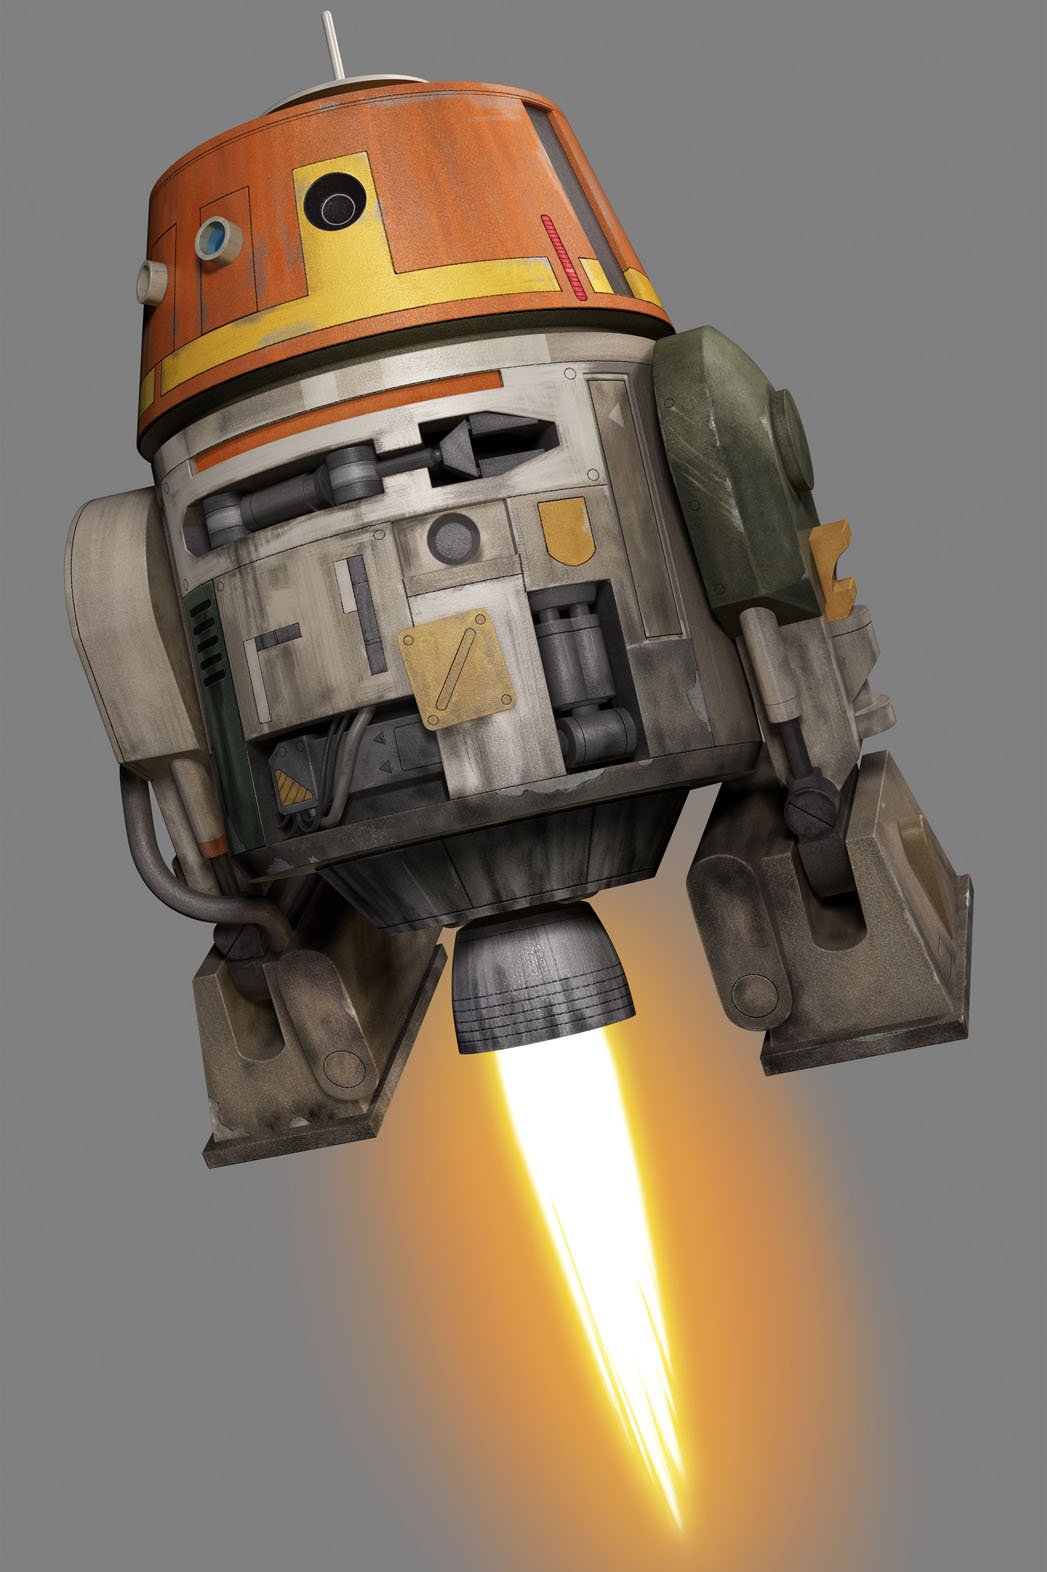 UPDATED: Meet the Real Life Chopper from Star Wars Rebels! StarWars.com Gets a New Look! With Kenobi